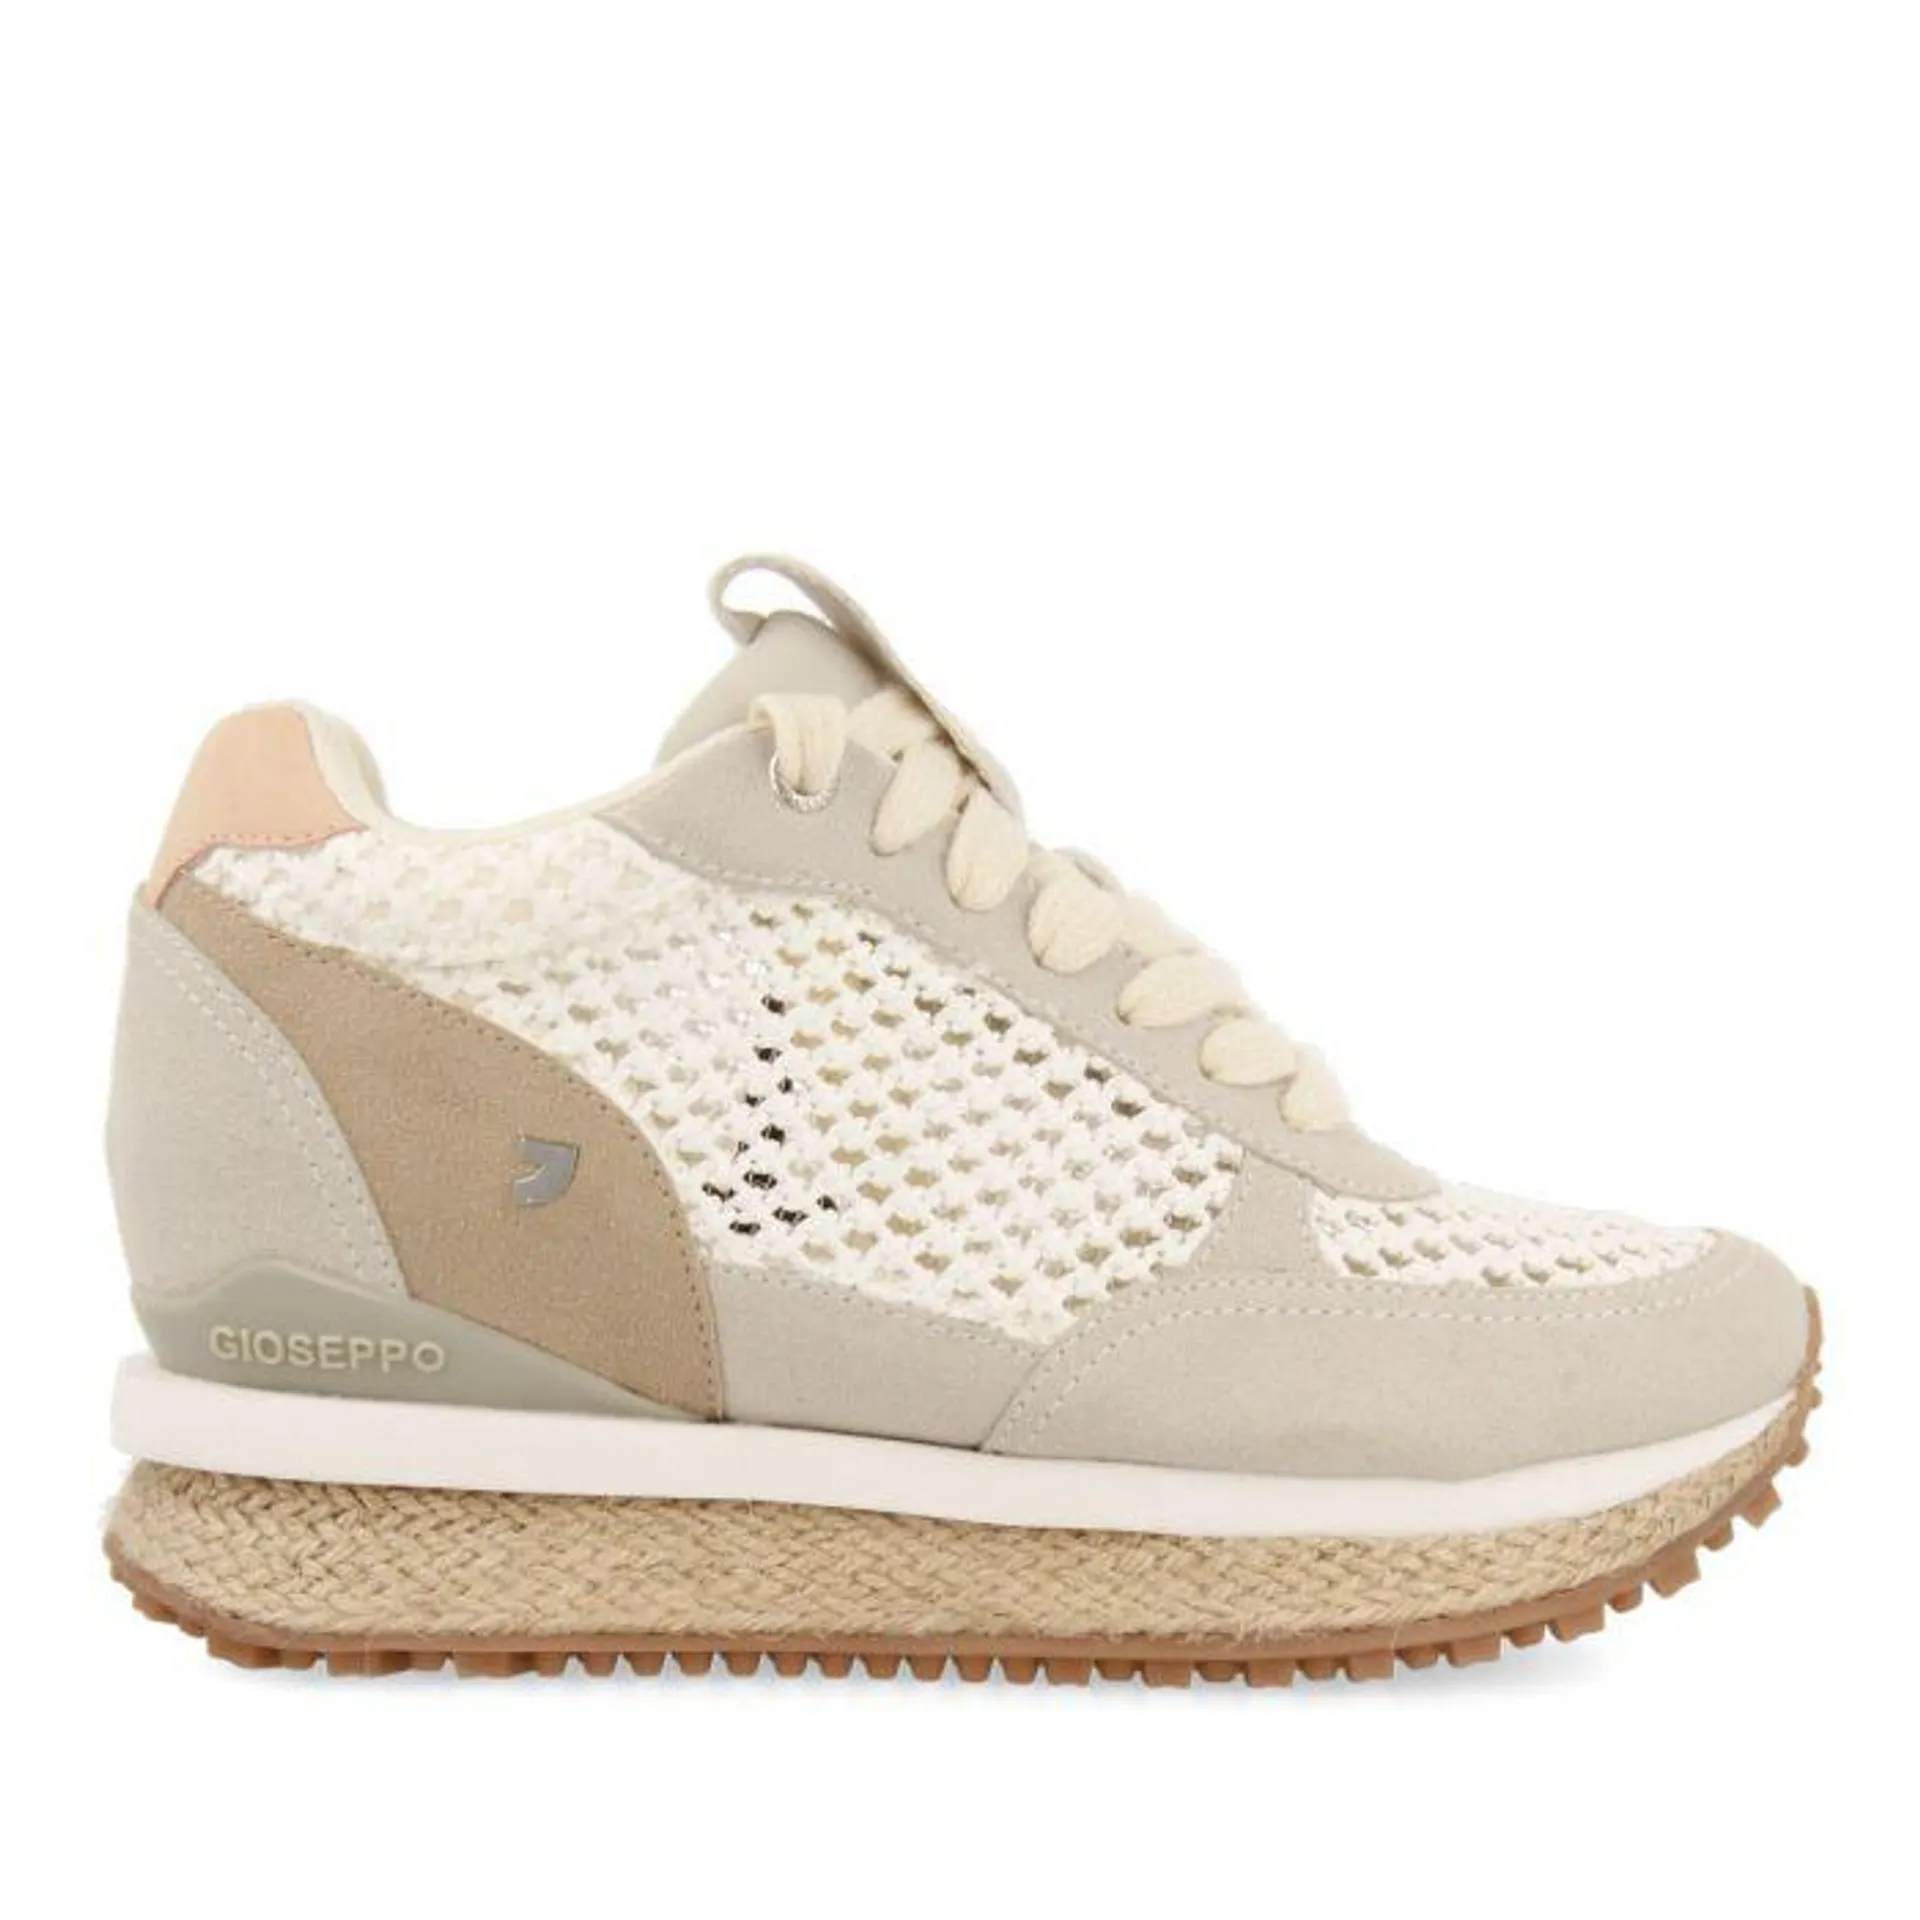 Teyran women's white mesh sneakers in raffia and jute with inner wedges